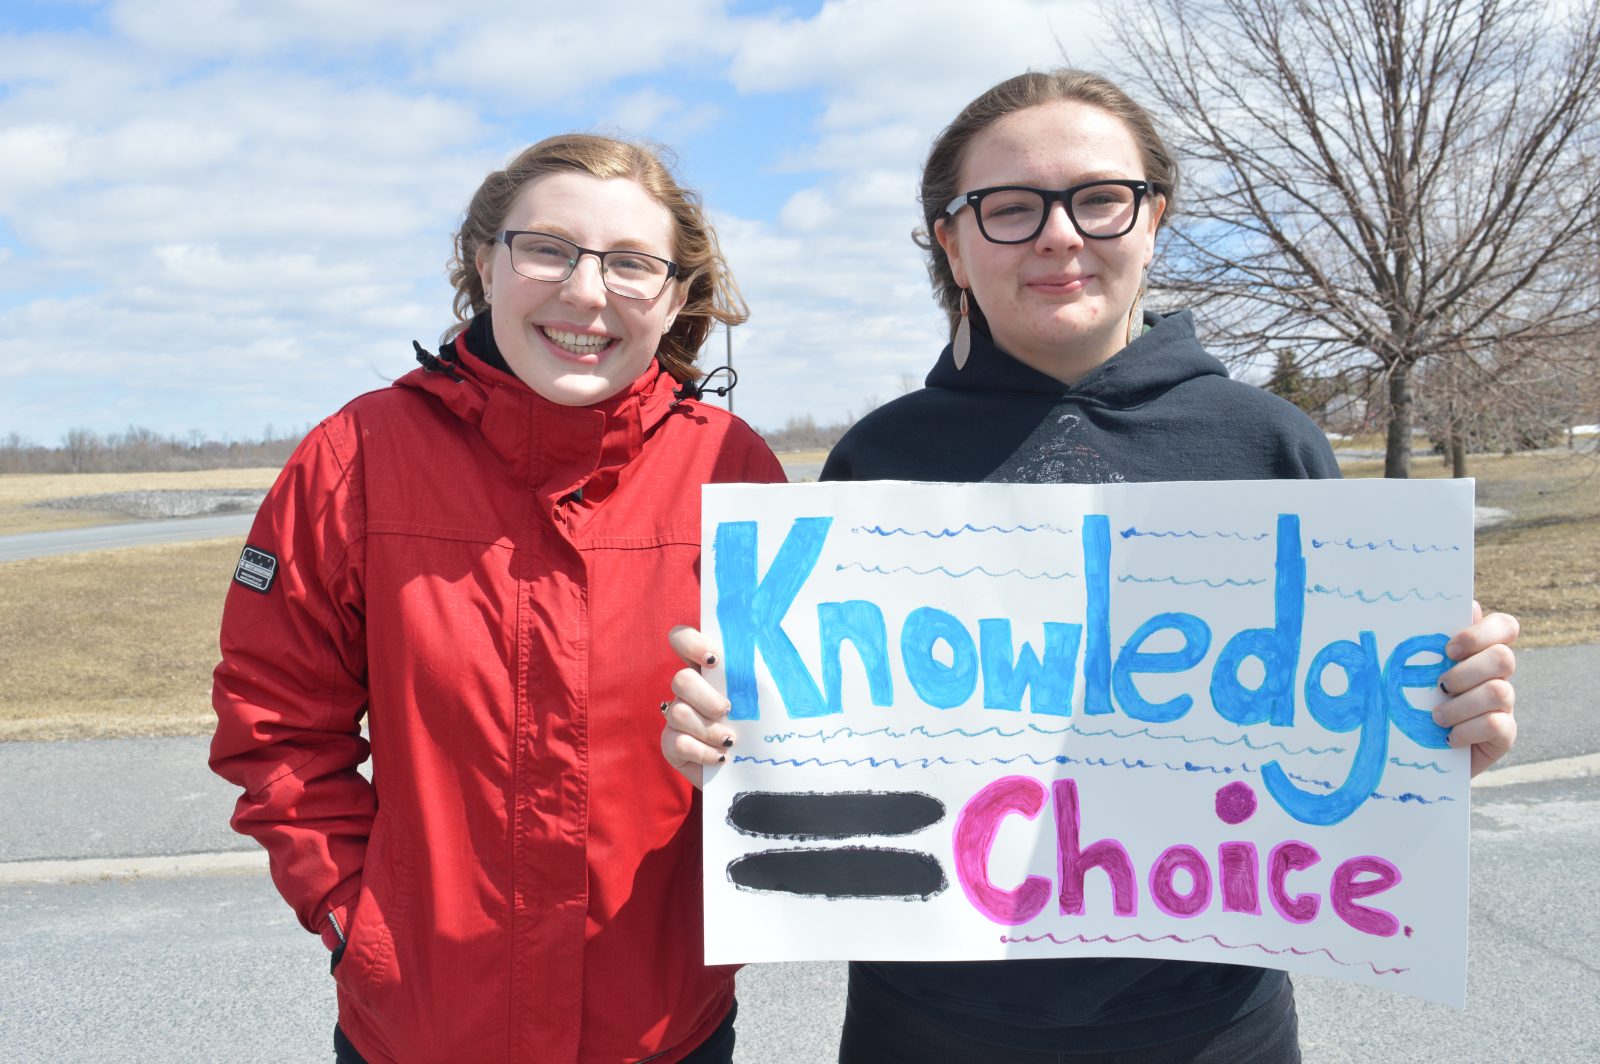 Local students protest education changes